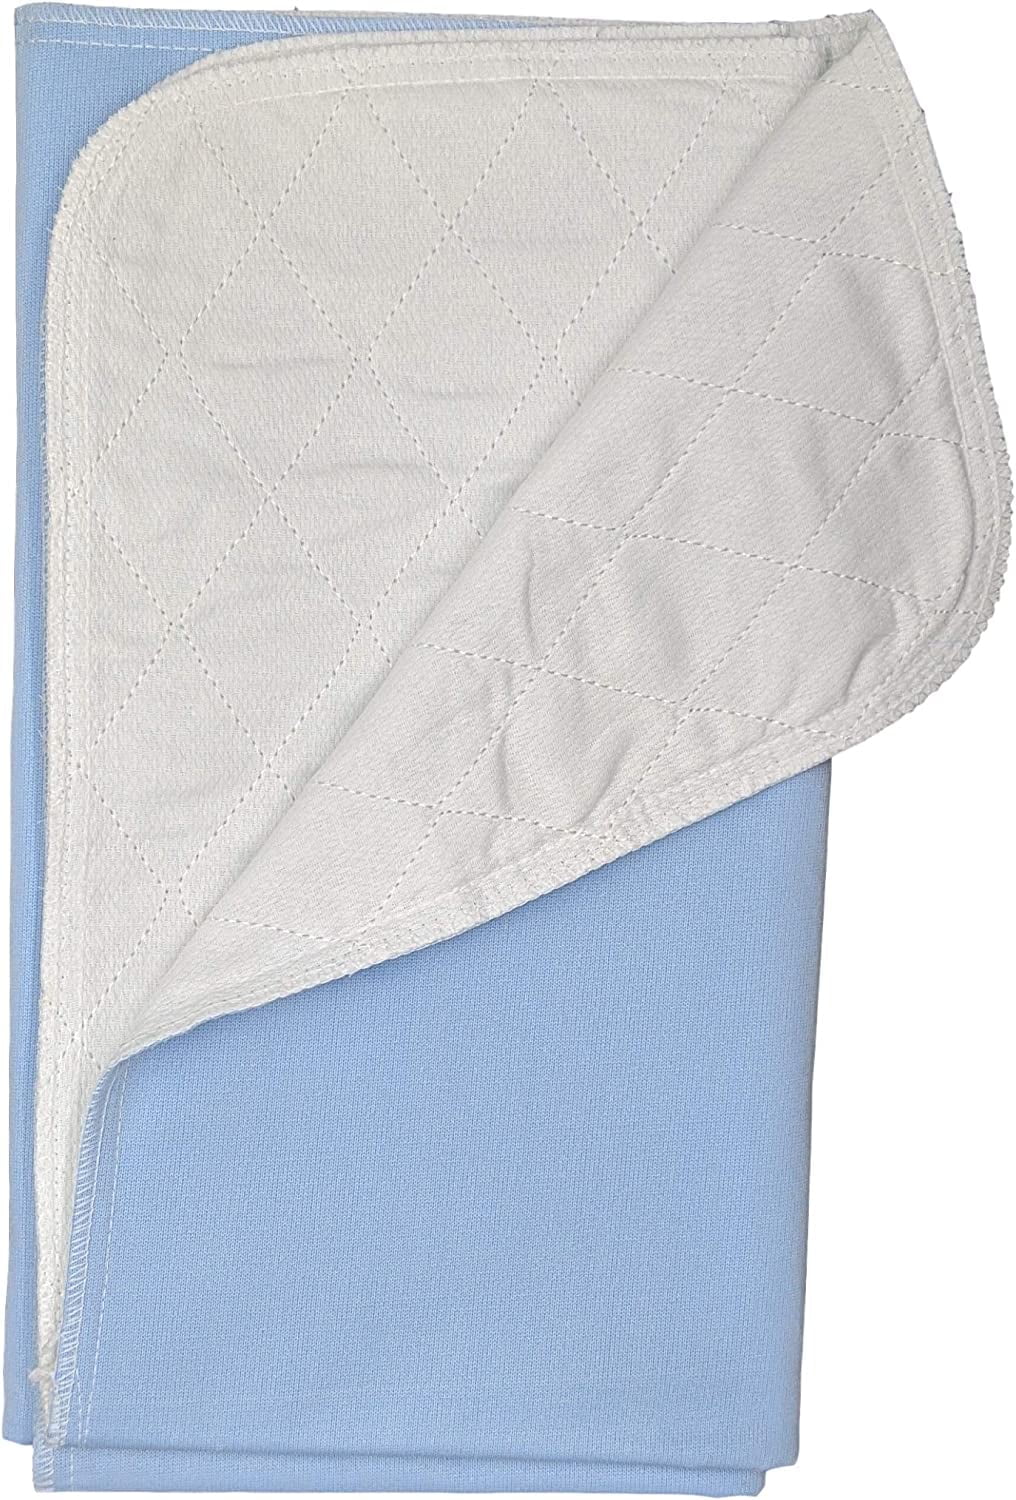 12 Pack Bed Pad Washable Incontinence Underpad - Absorbent